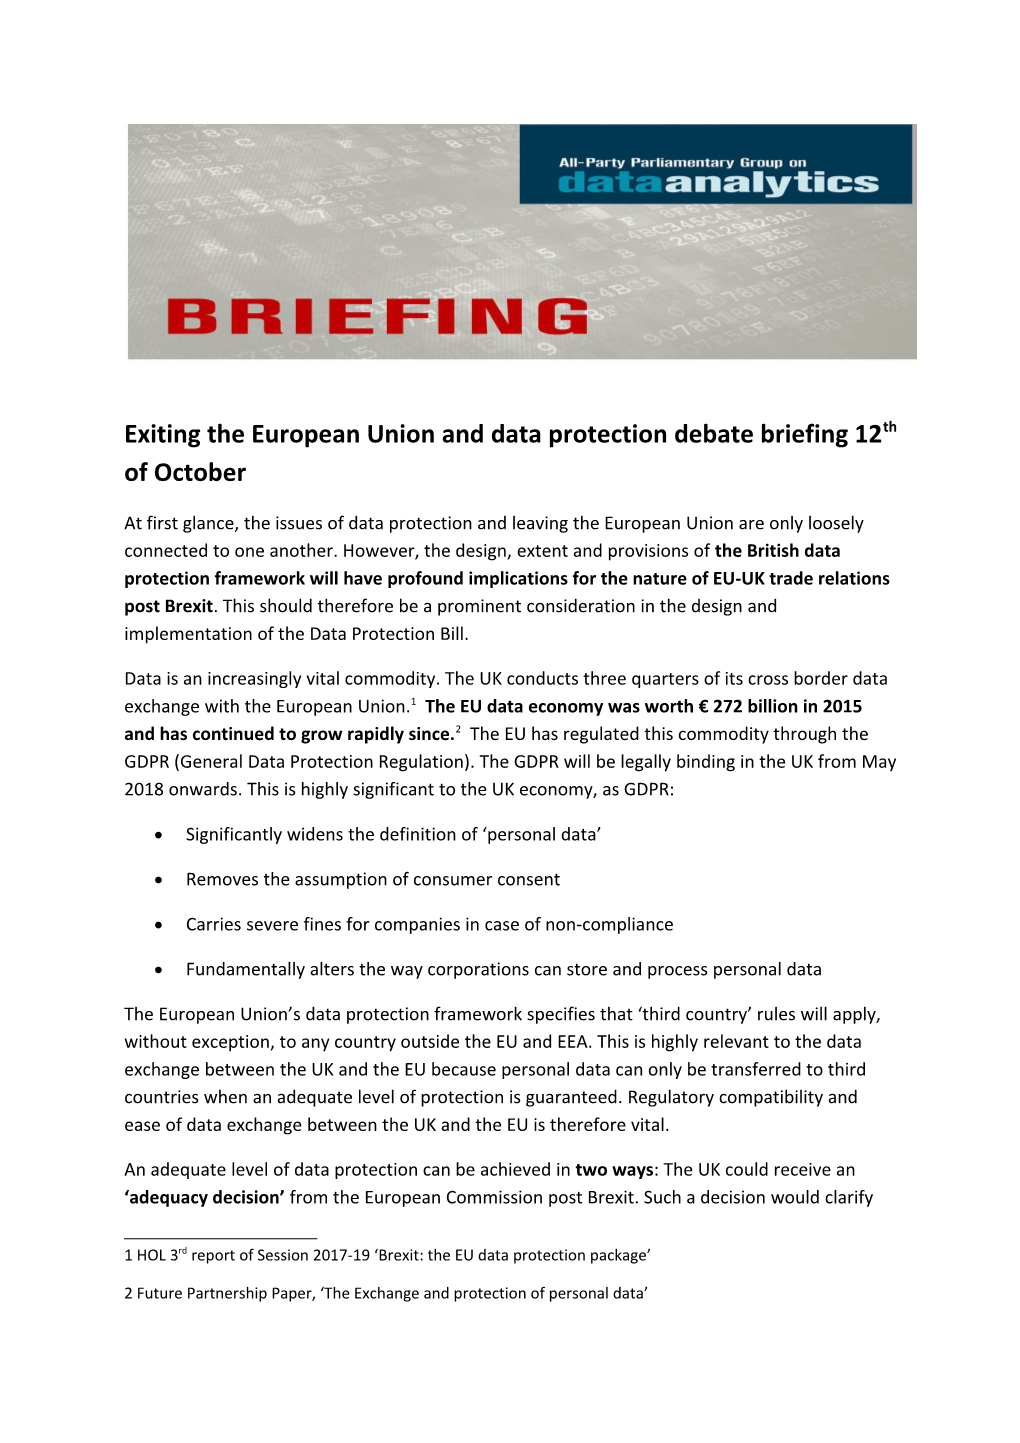 Exiting the European Union and Data Protection Debate Briefing 12Th of October